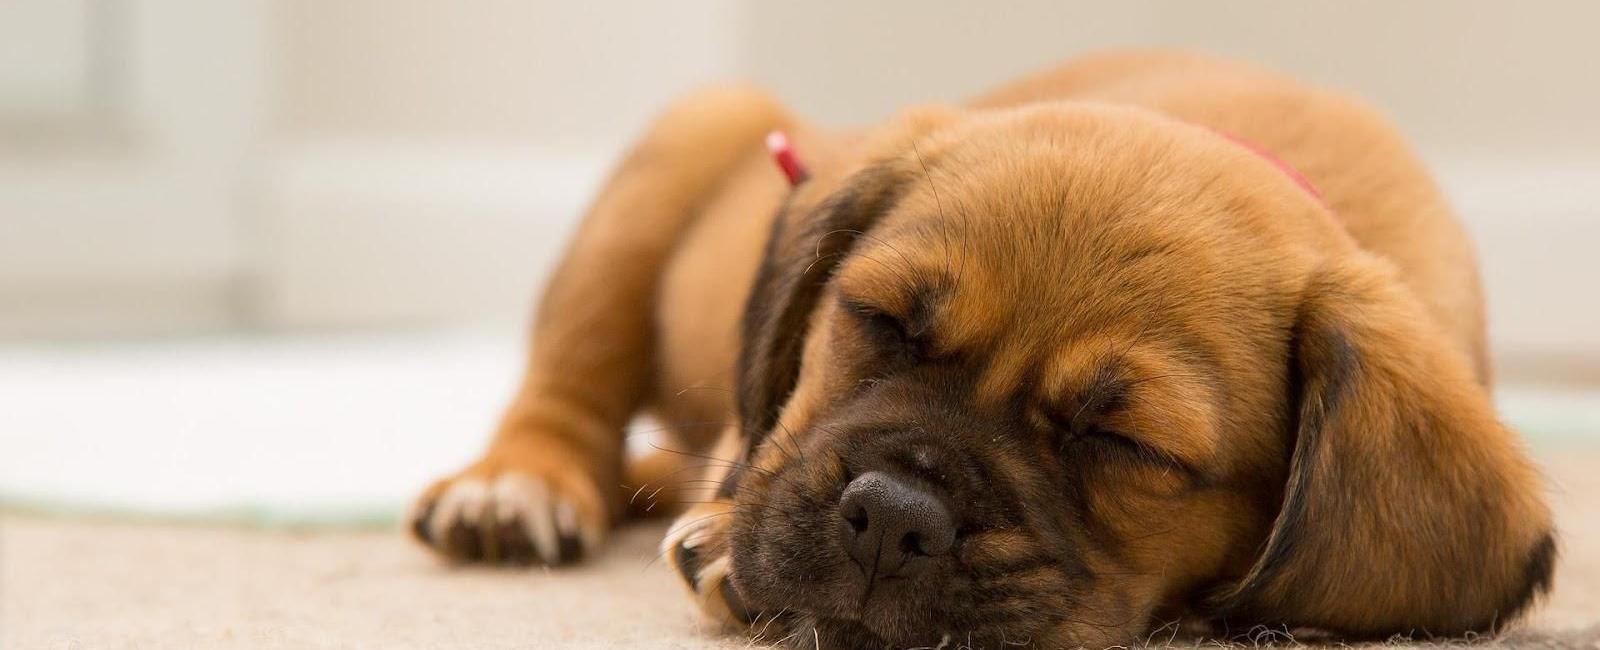 Puppy Is Not Eating and Sleeping a Lot? Here’s Why & What to Do